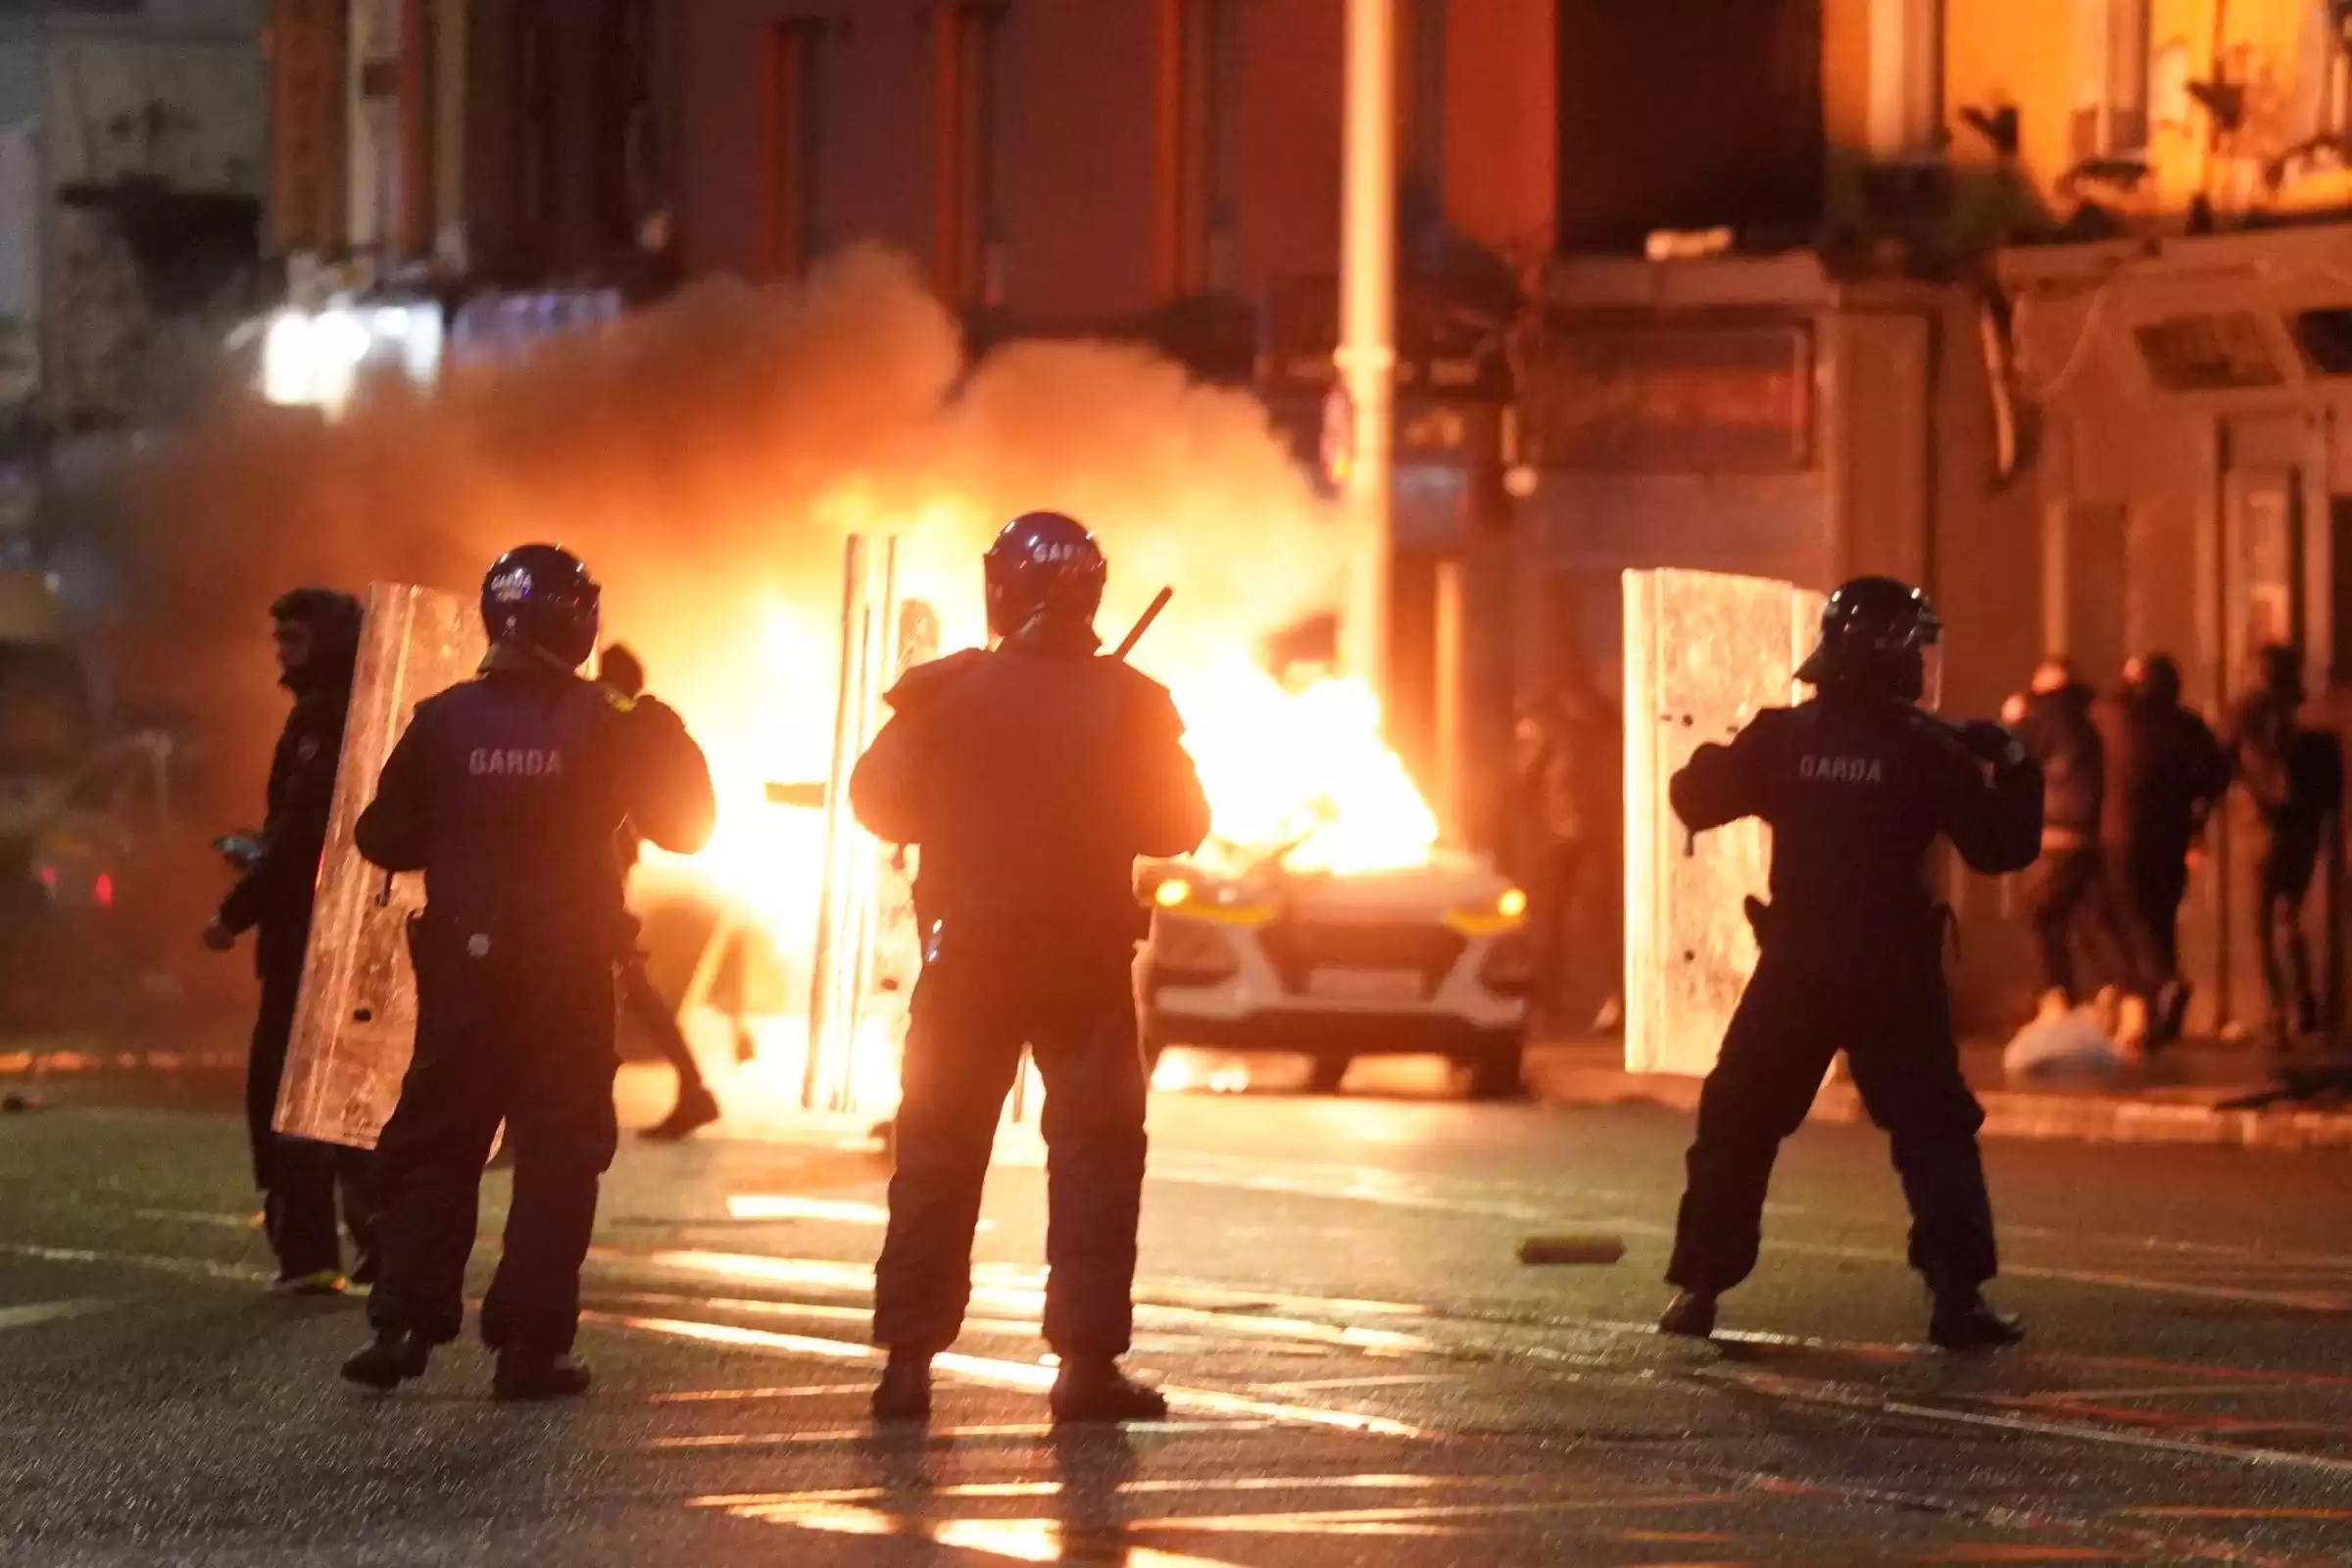 34 arrests made in Dublin following school knife attack - rioting incident